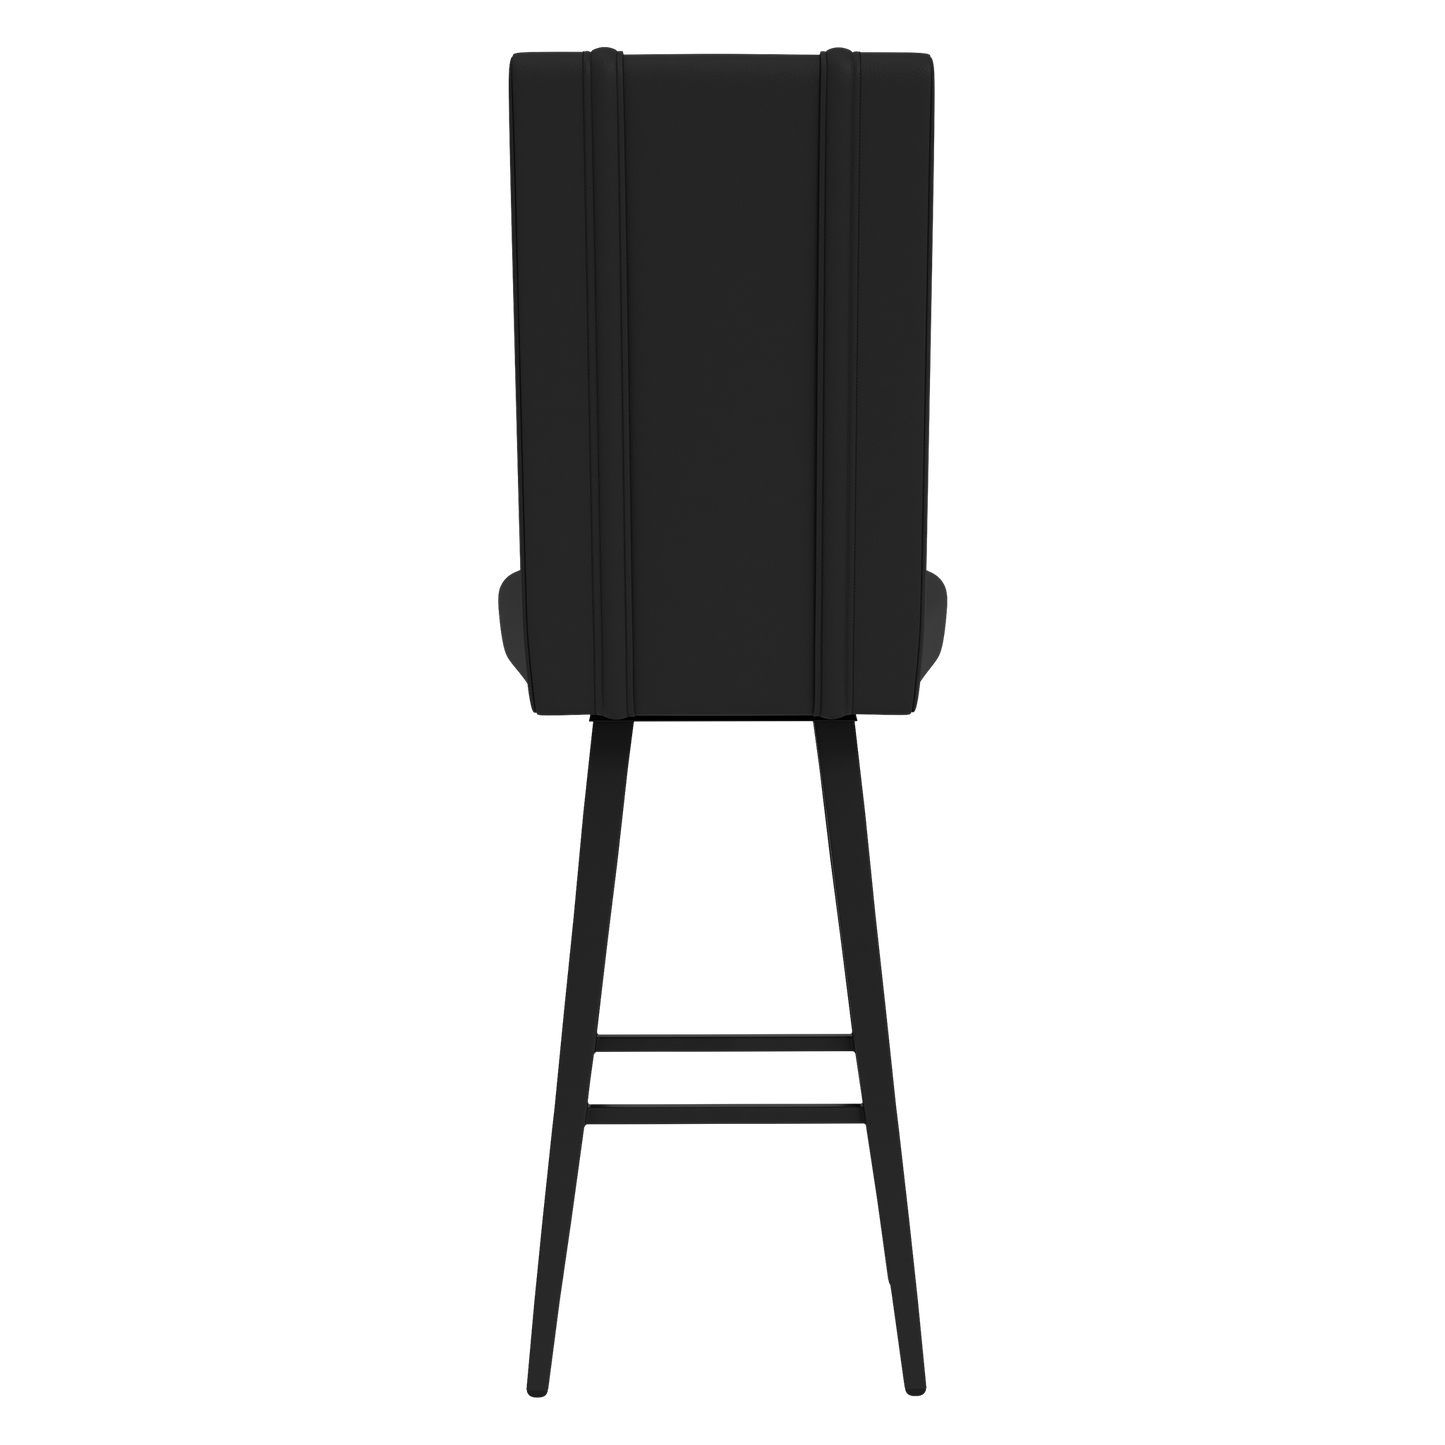 Swivel Bar Stool 2000 with Los Angeles Dodgers Secondary